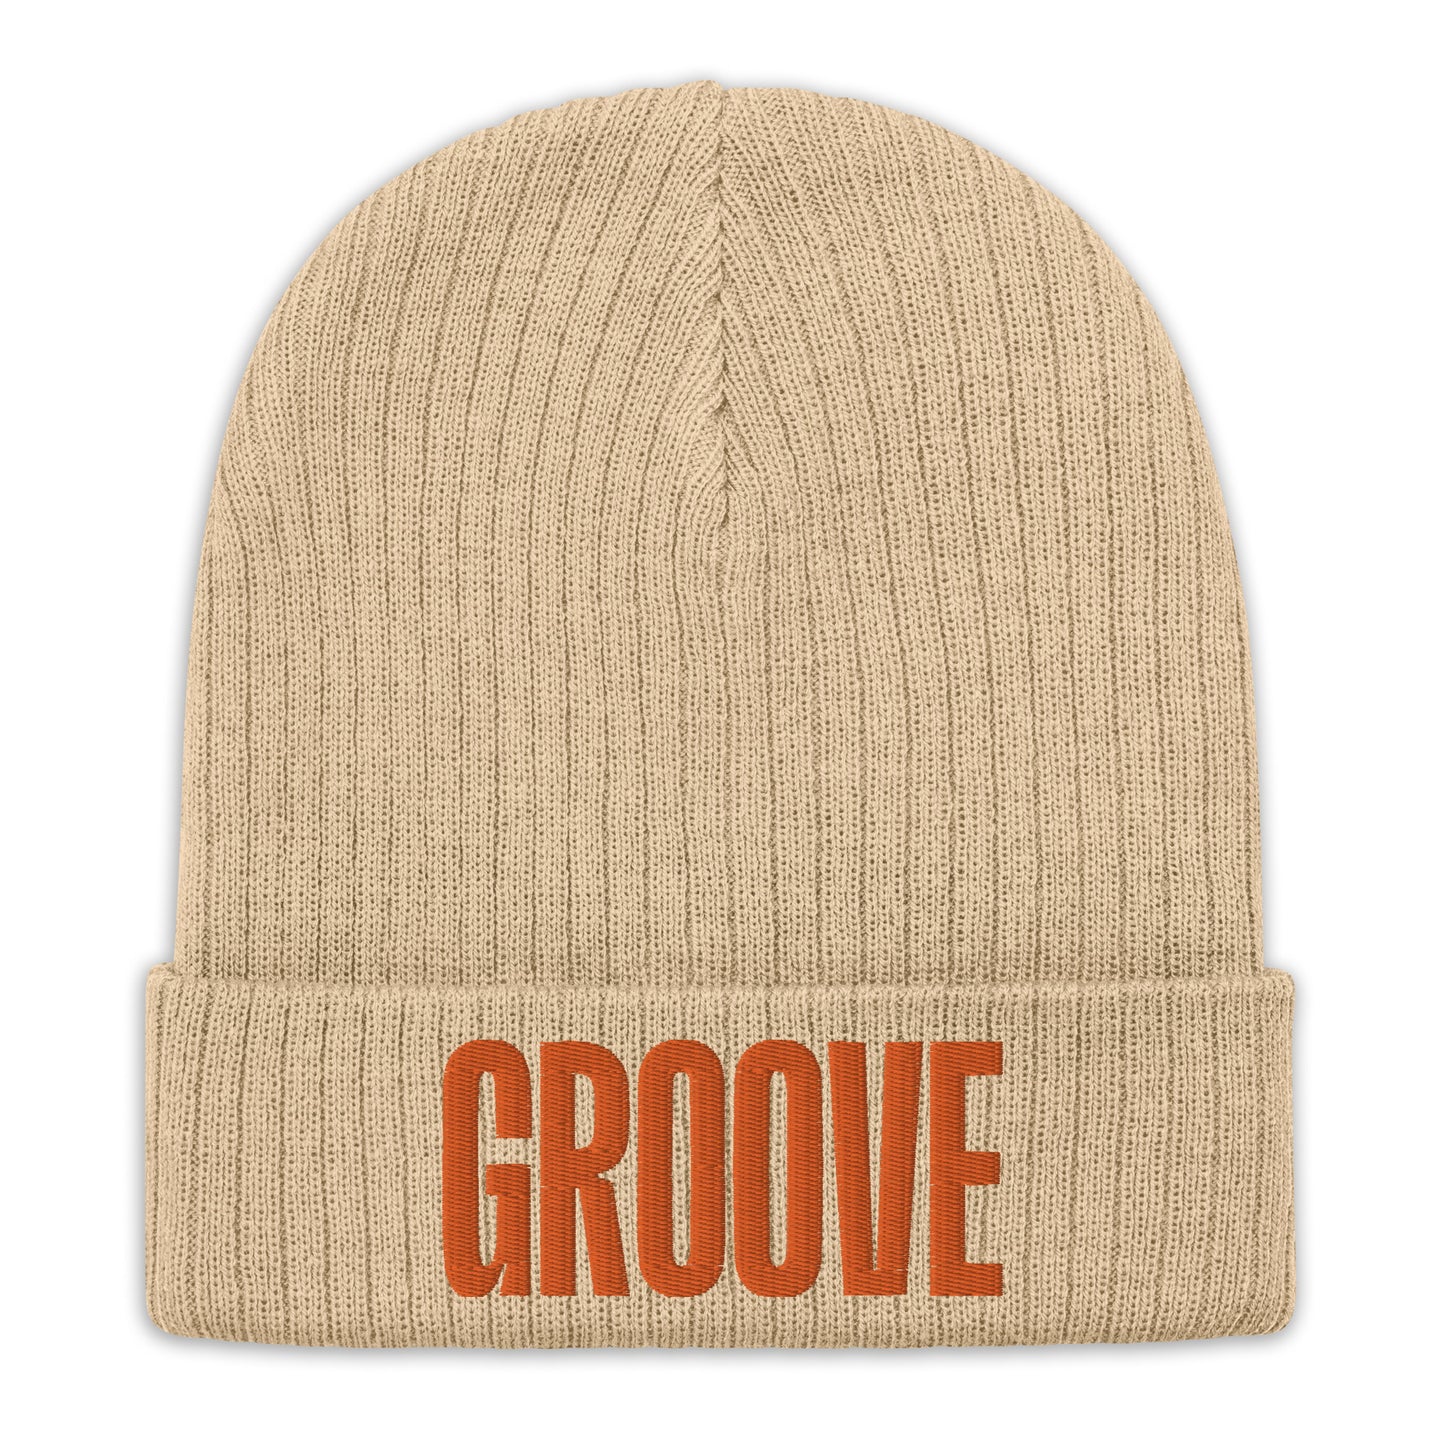 GROOVE - Ribbed knit beanie